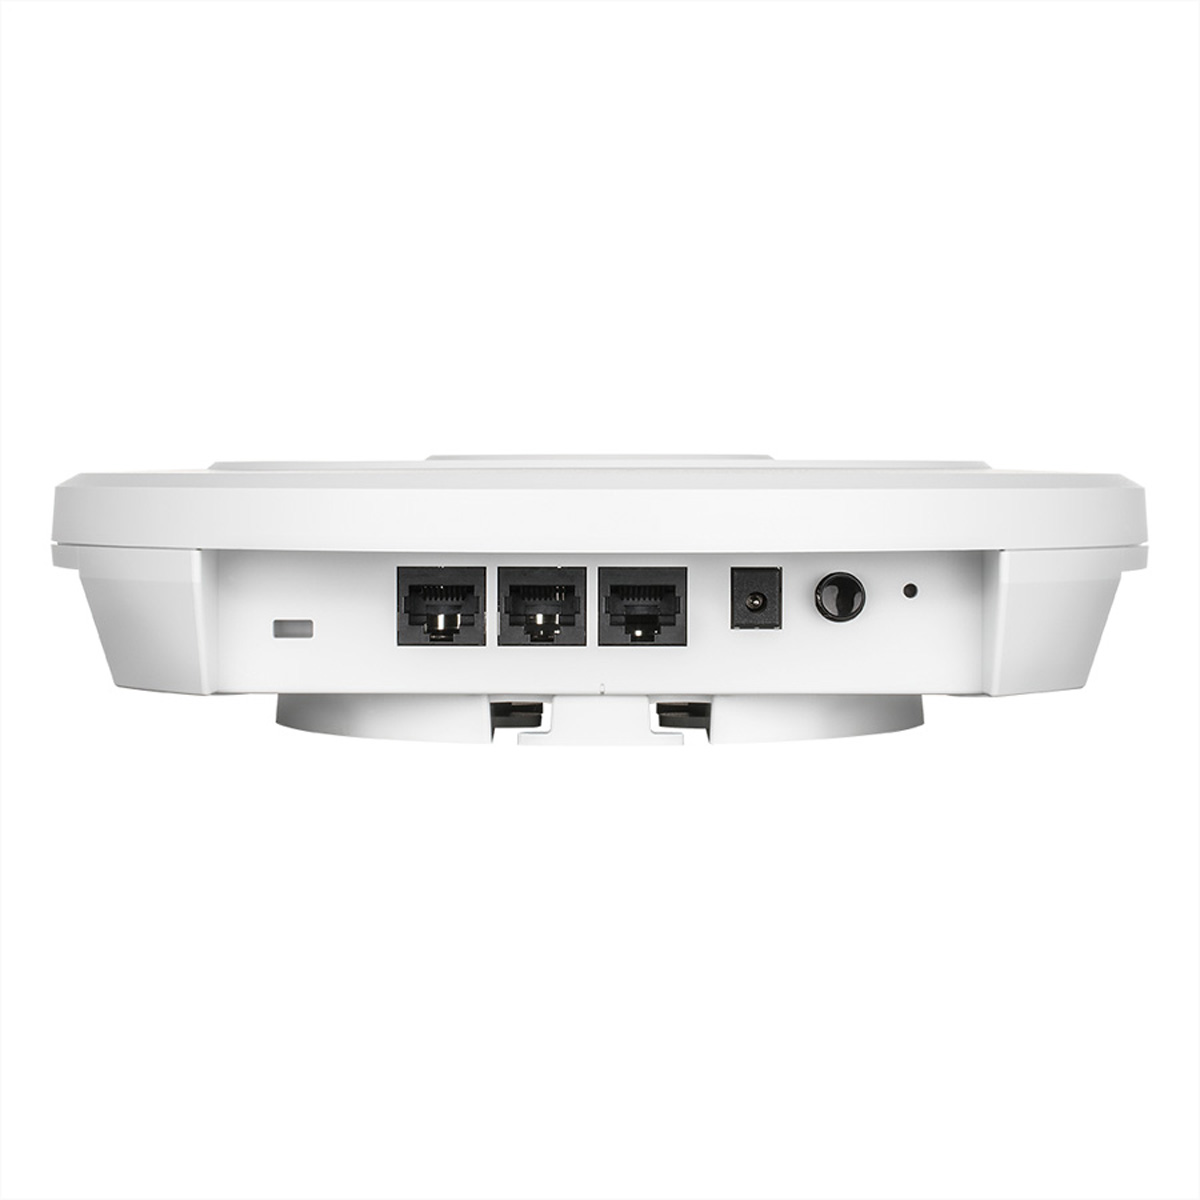 Unified Tri-Band DWL-7620AP AC2200 Point Gbit/s Access 2,2 D-LINK Wireless Wave2 LAN